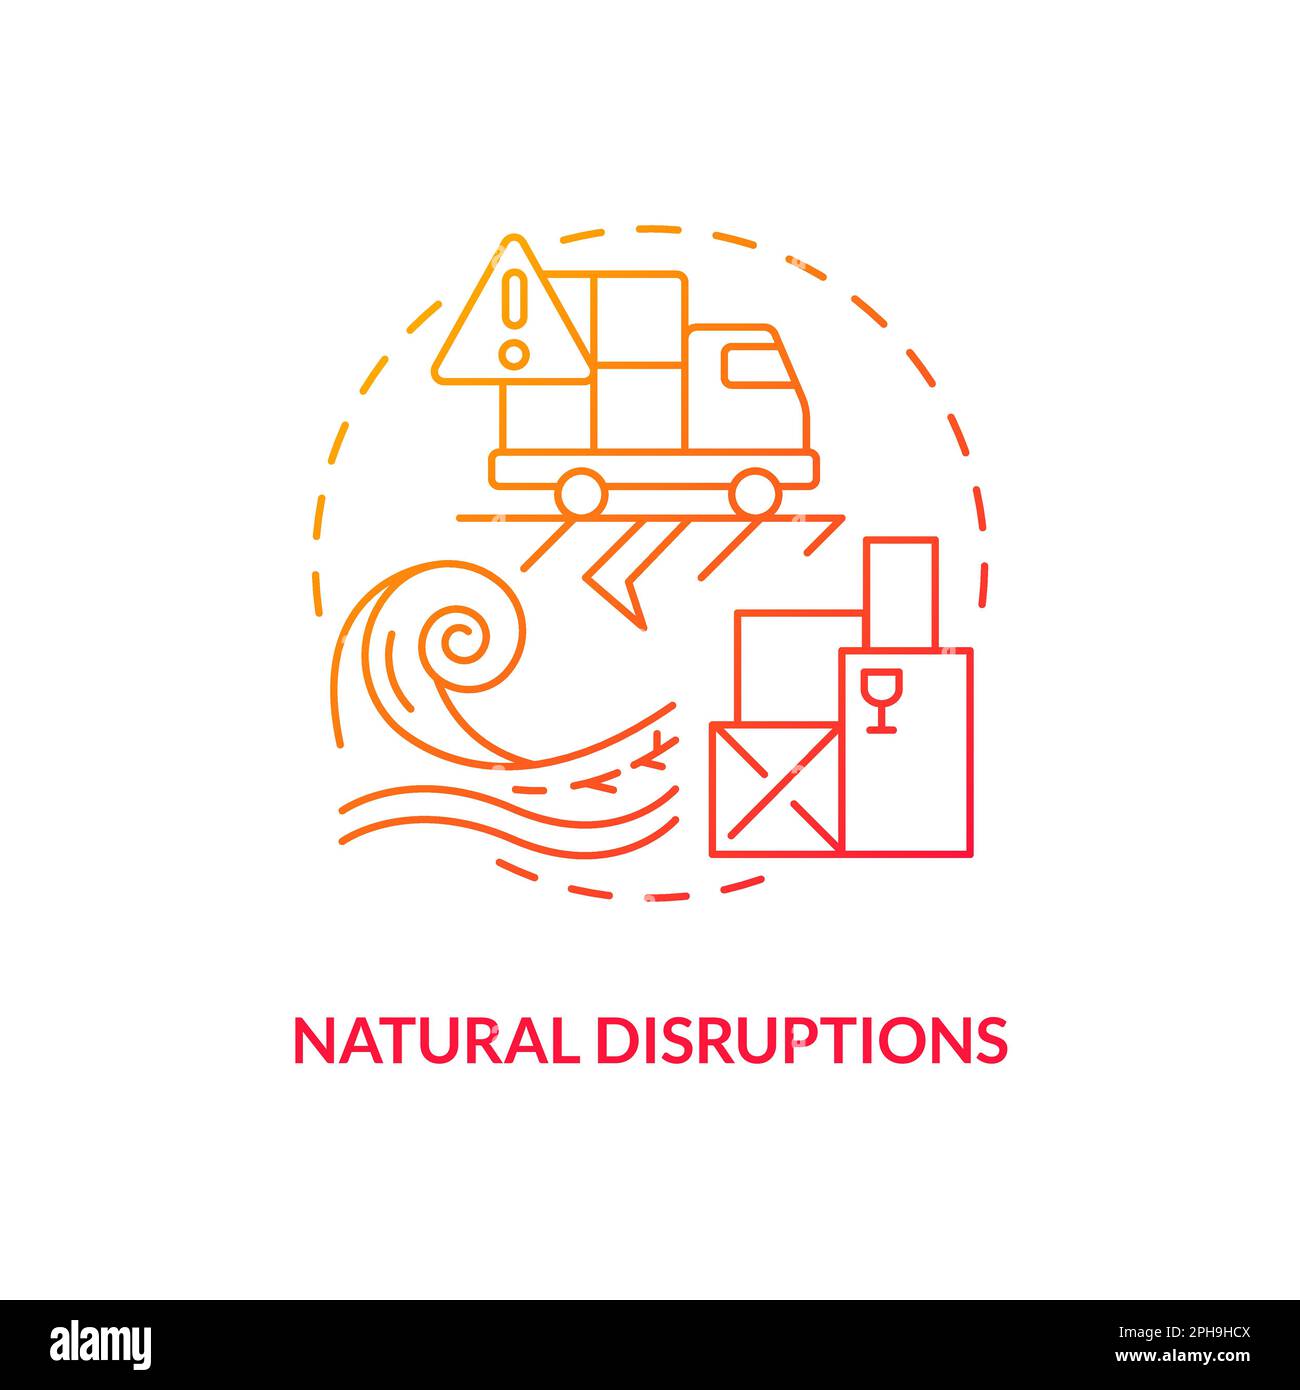 Natural disruptions red gradient concept icon Stock Vector